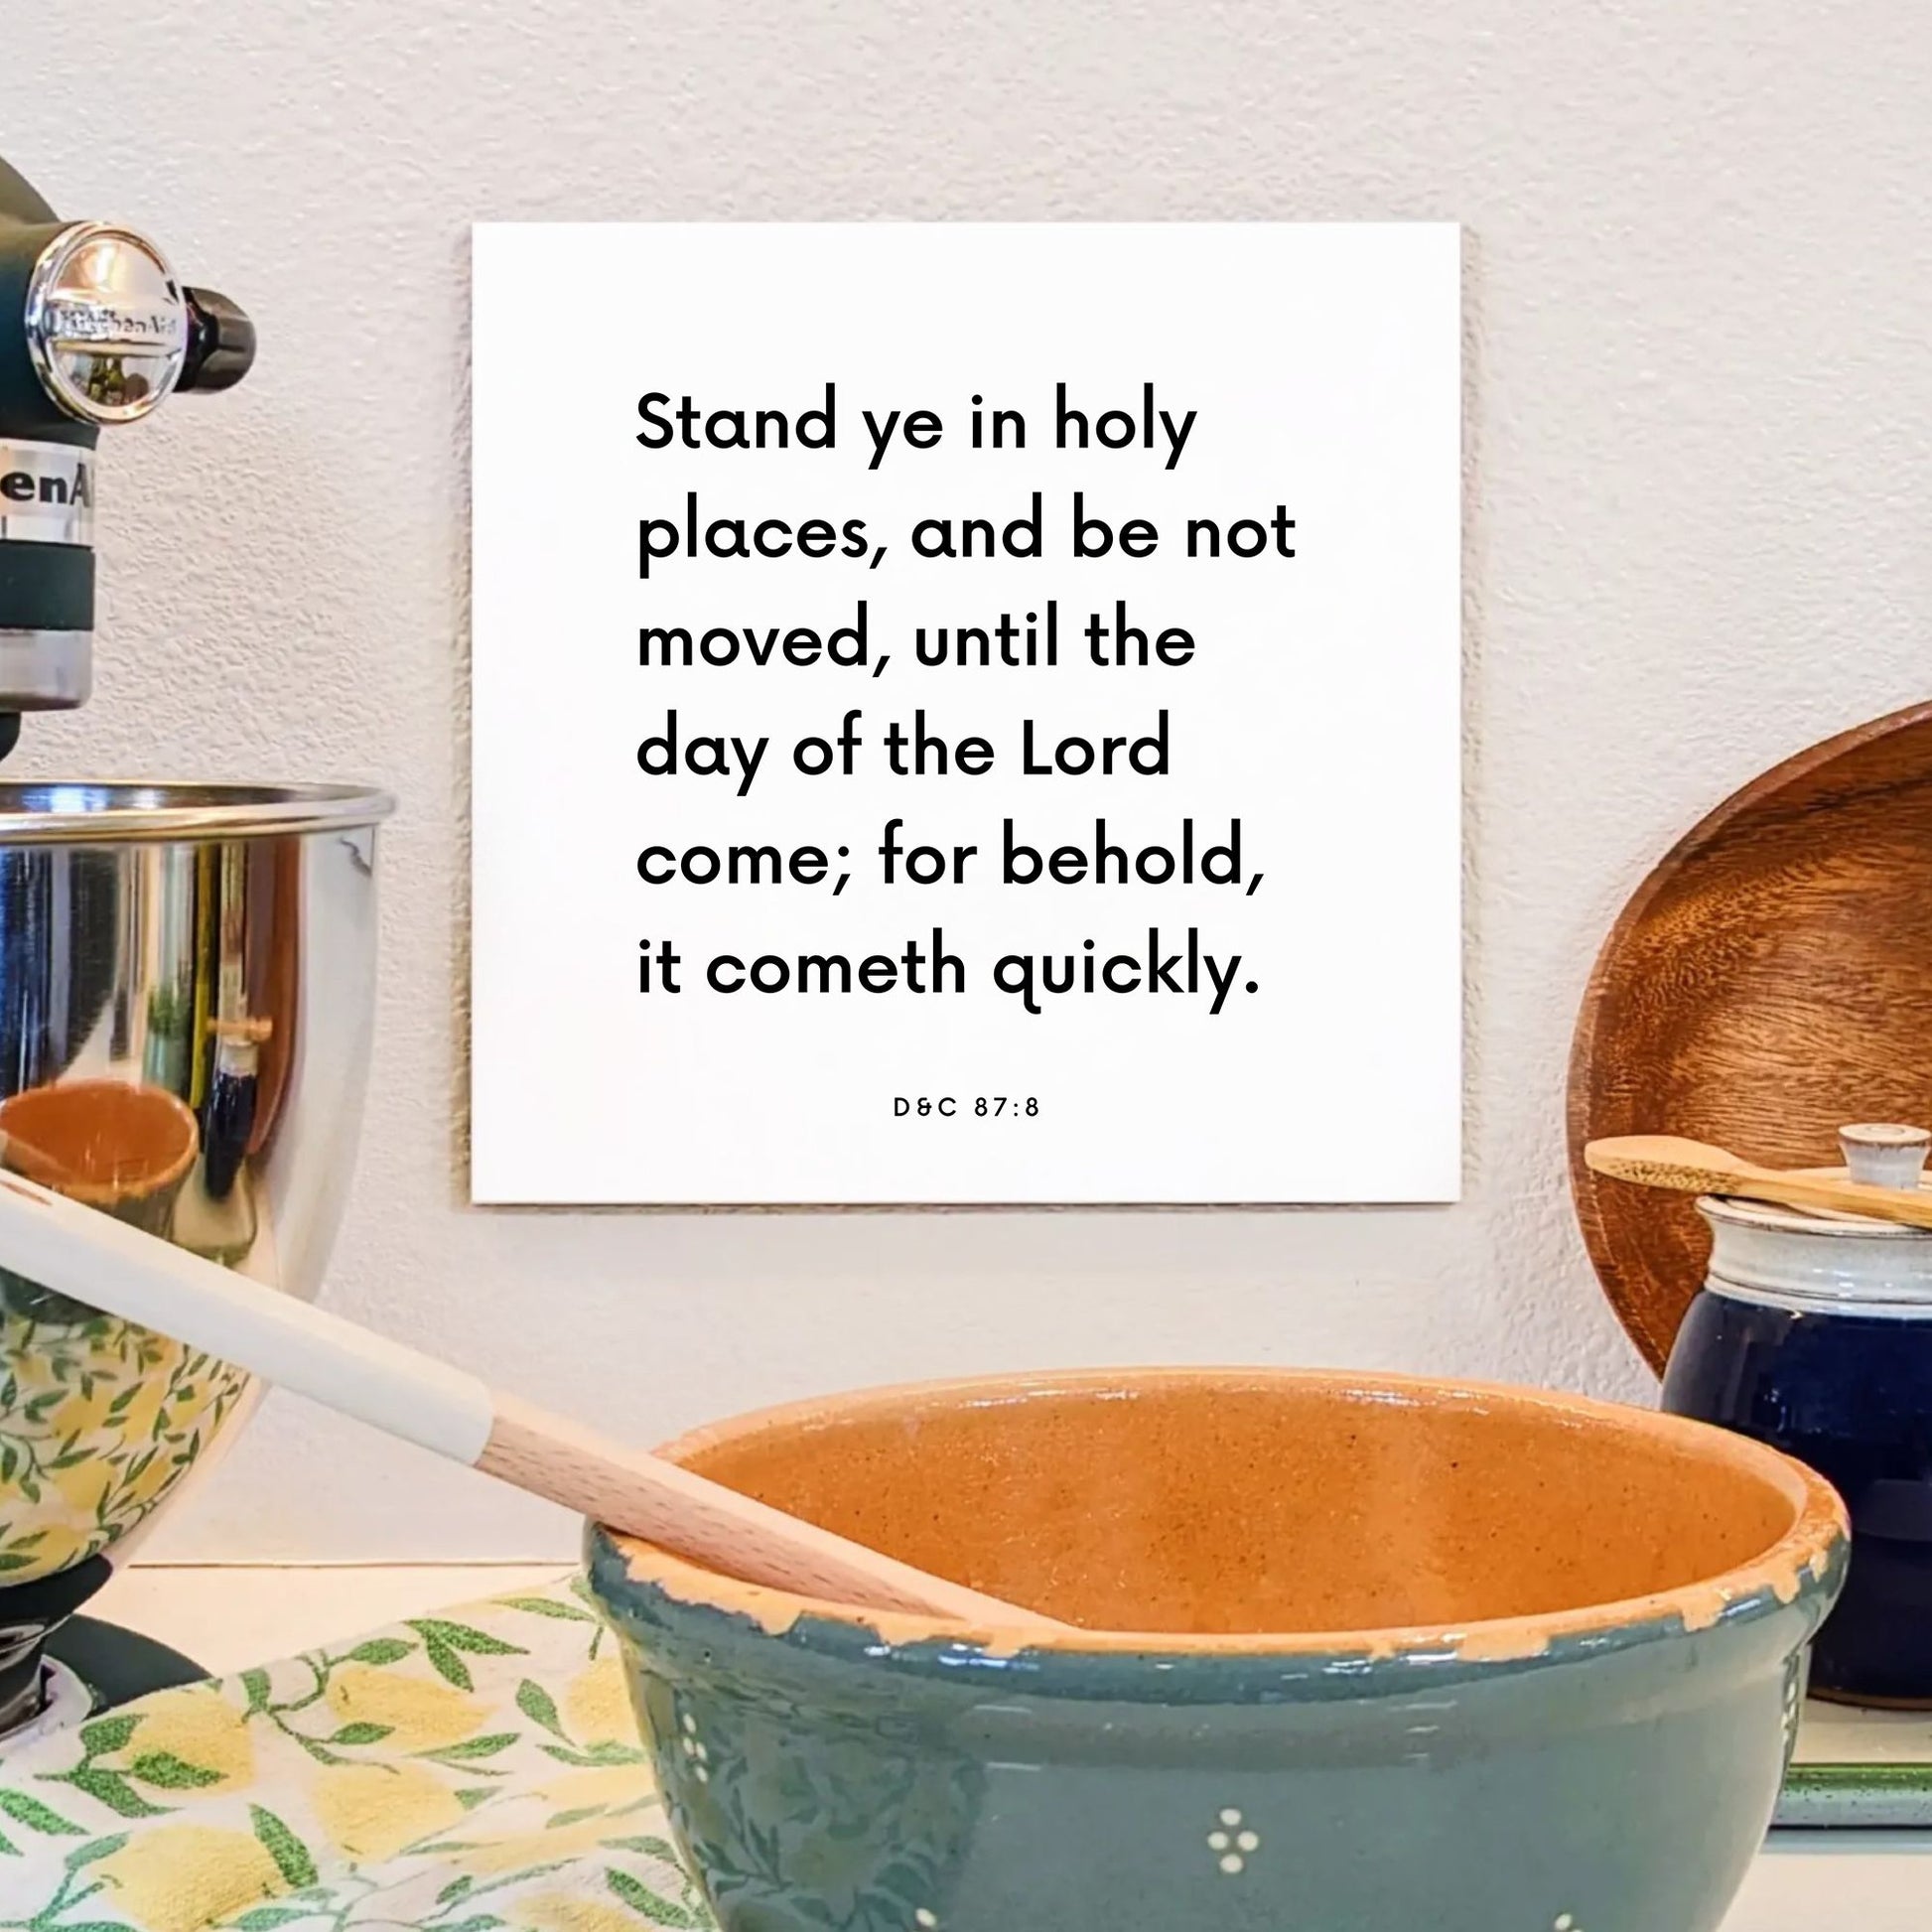 Kitchen mouting of the scripture tile for D&C 87:8 - "Stand ye in holy places, and be not moved"